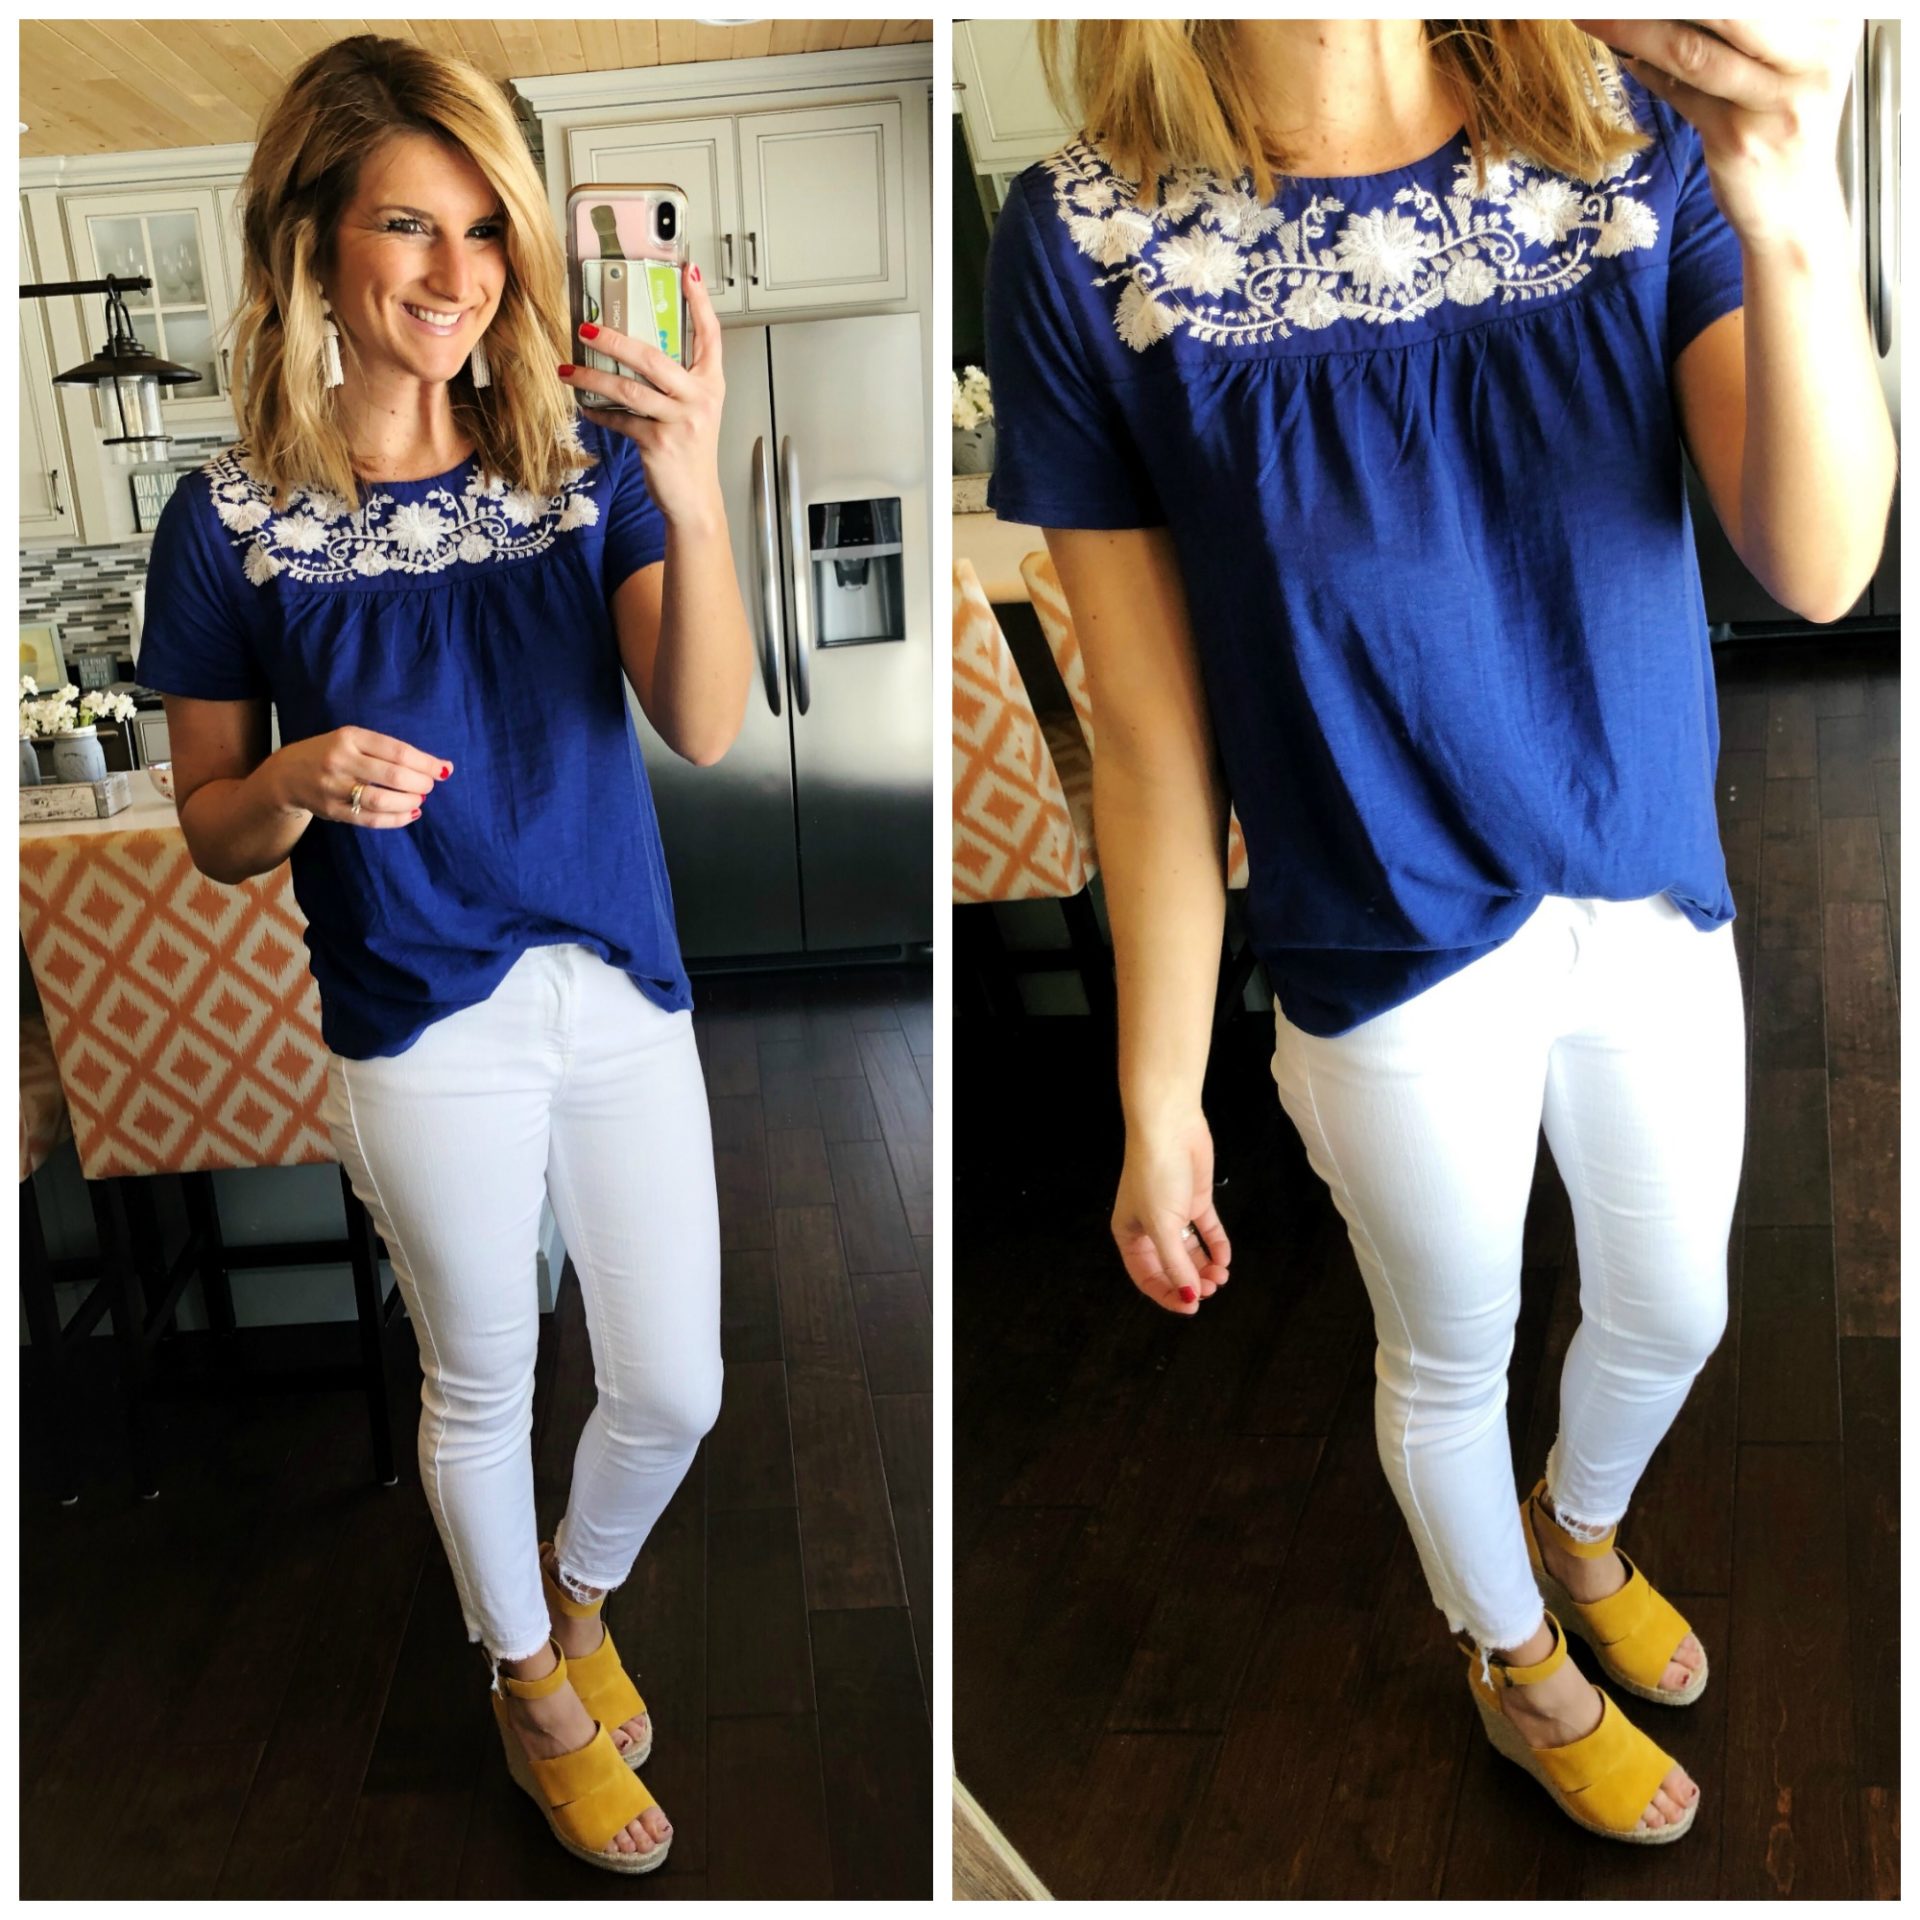 Summer Casual Outfit // Vacation Outfit // Embroidered Top with White Jeans and Wedges // Statement Earrings // Spring Fashion // Spring Break 